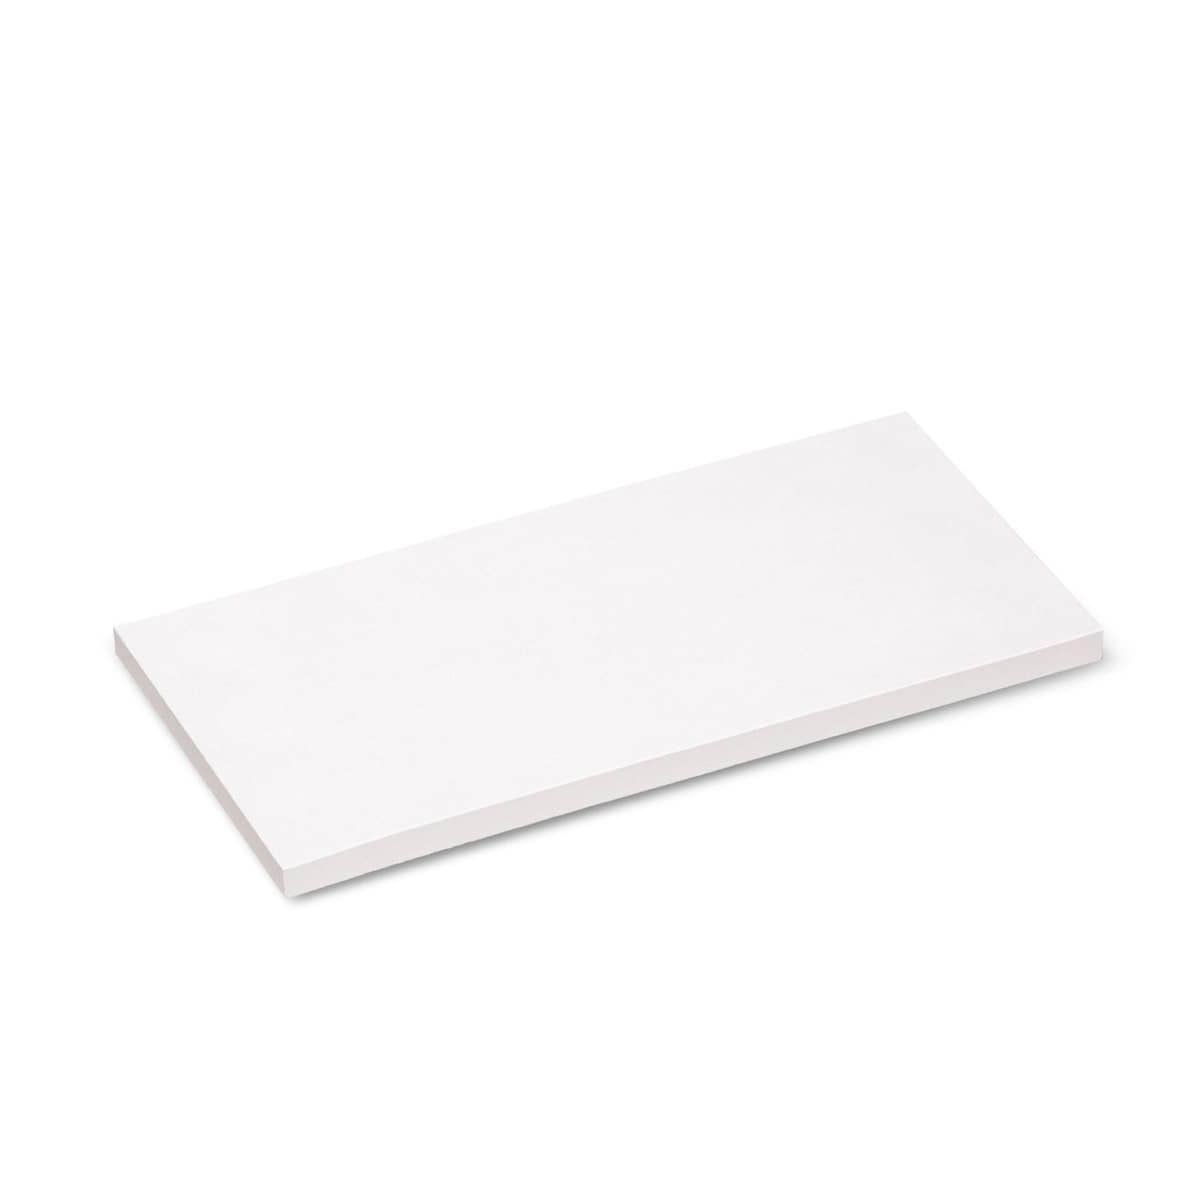 Stick-It X-tra Cards, rectangular, 100 sheets, single colors